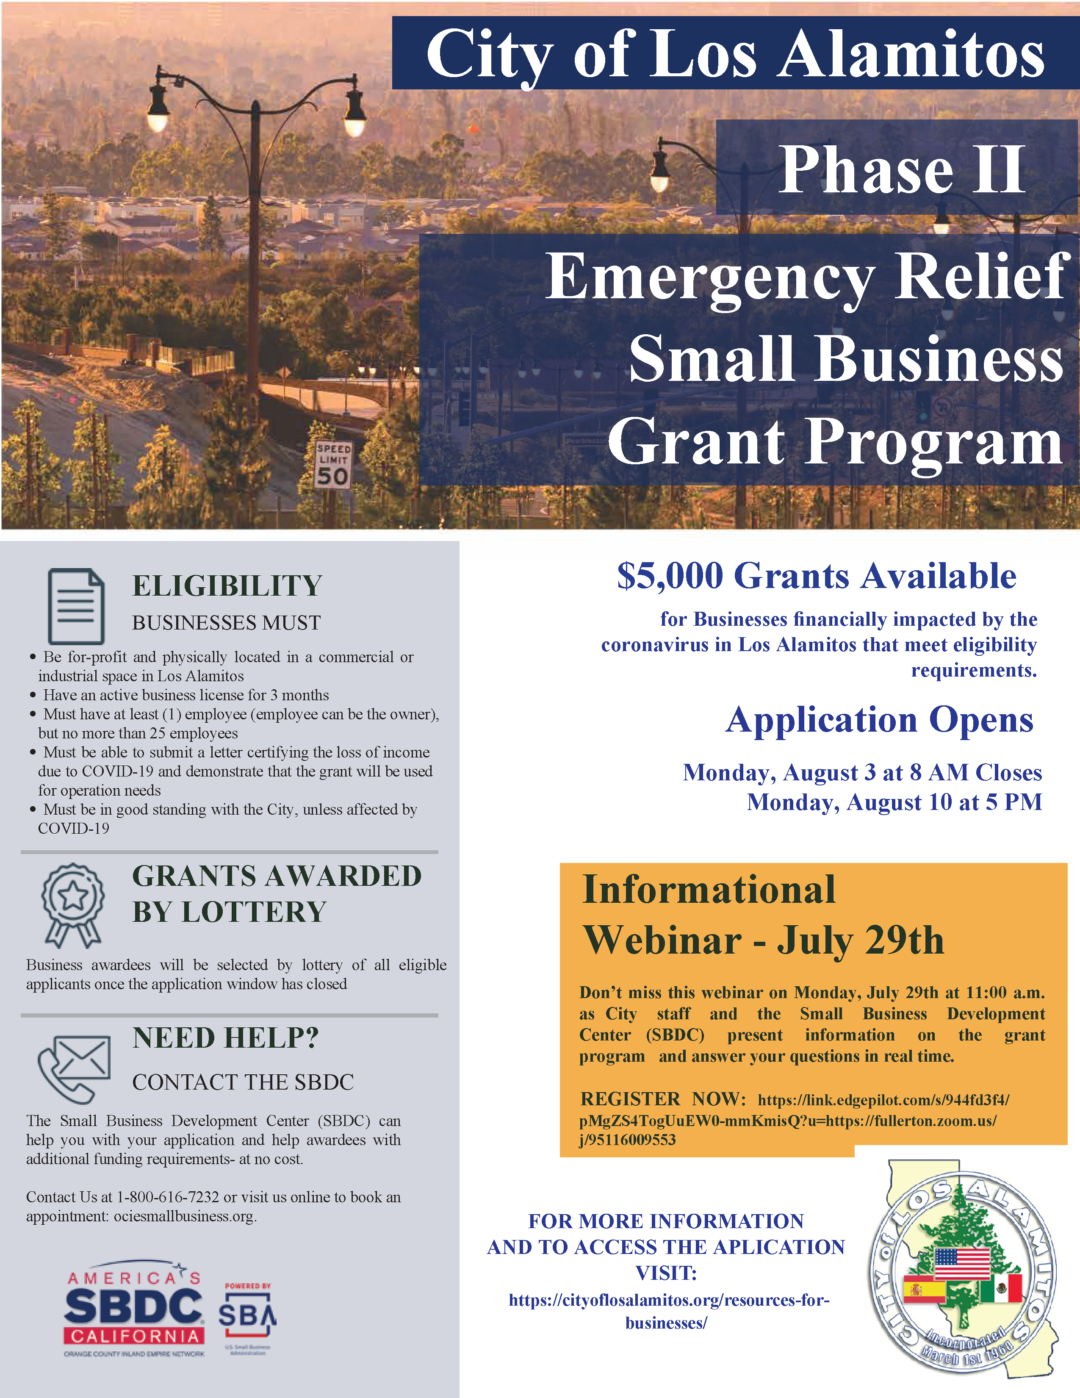 Coming Soon Applications for Phase II of the Emergency Relief Small